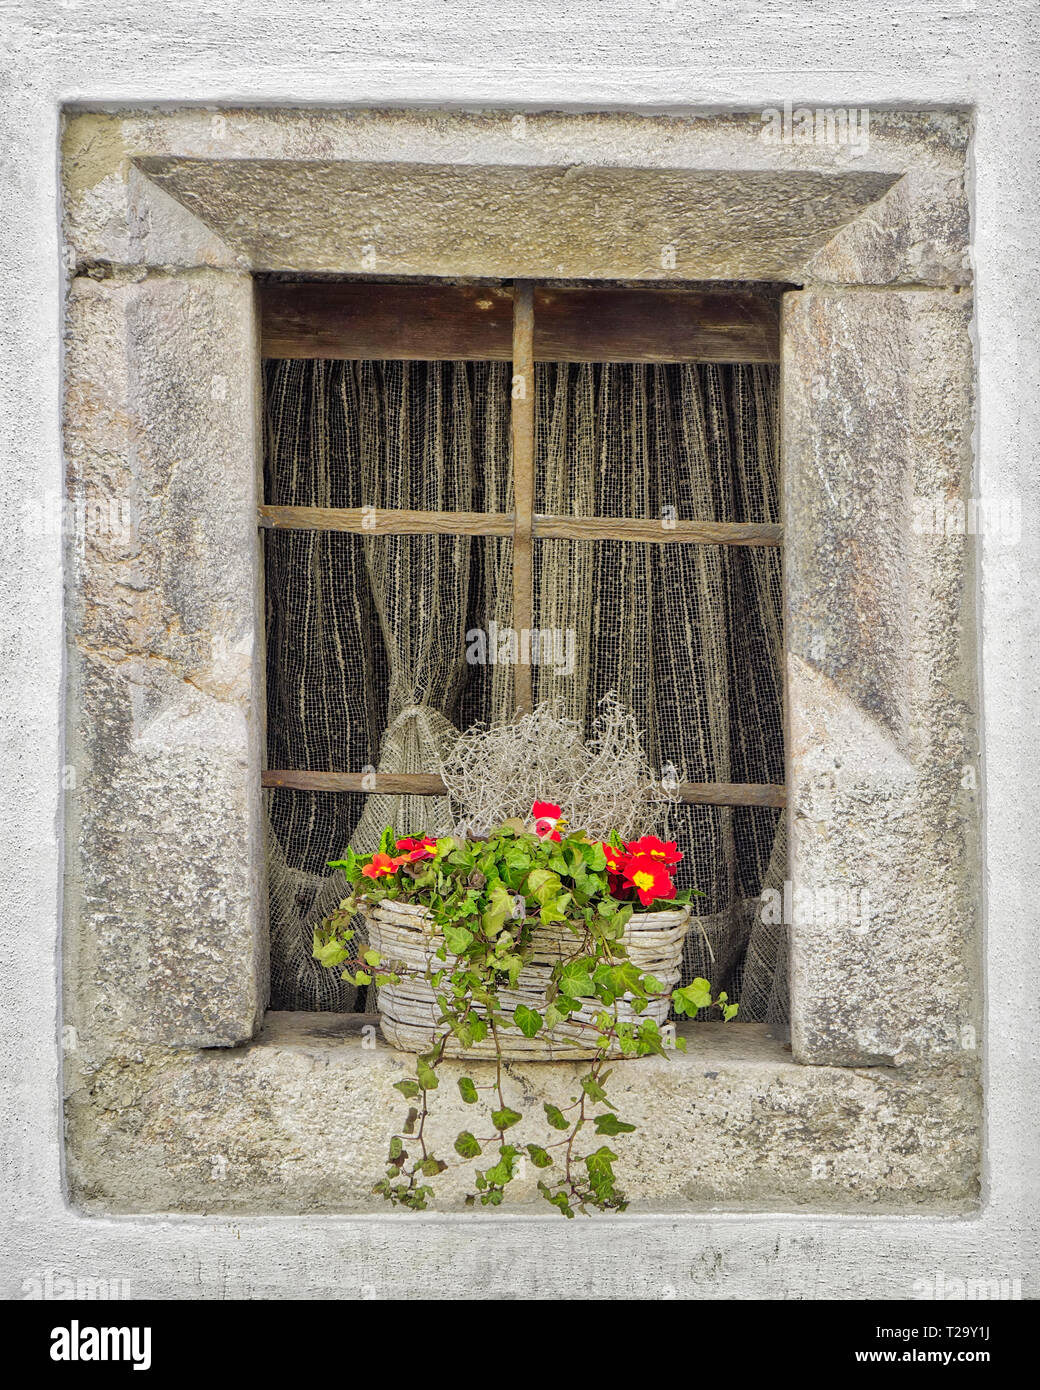 AT - TYROL: Old stone window with flower basket at Rattenberg on Inn Stock Photo